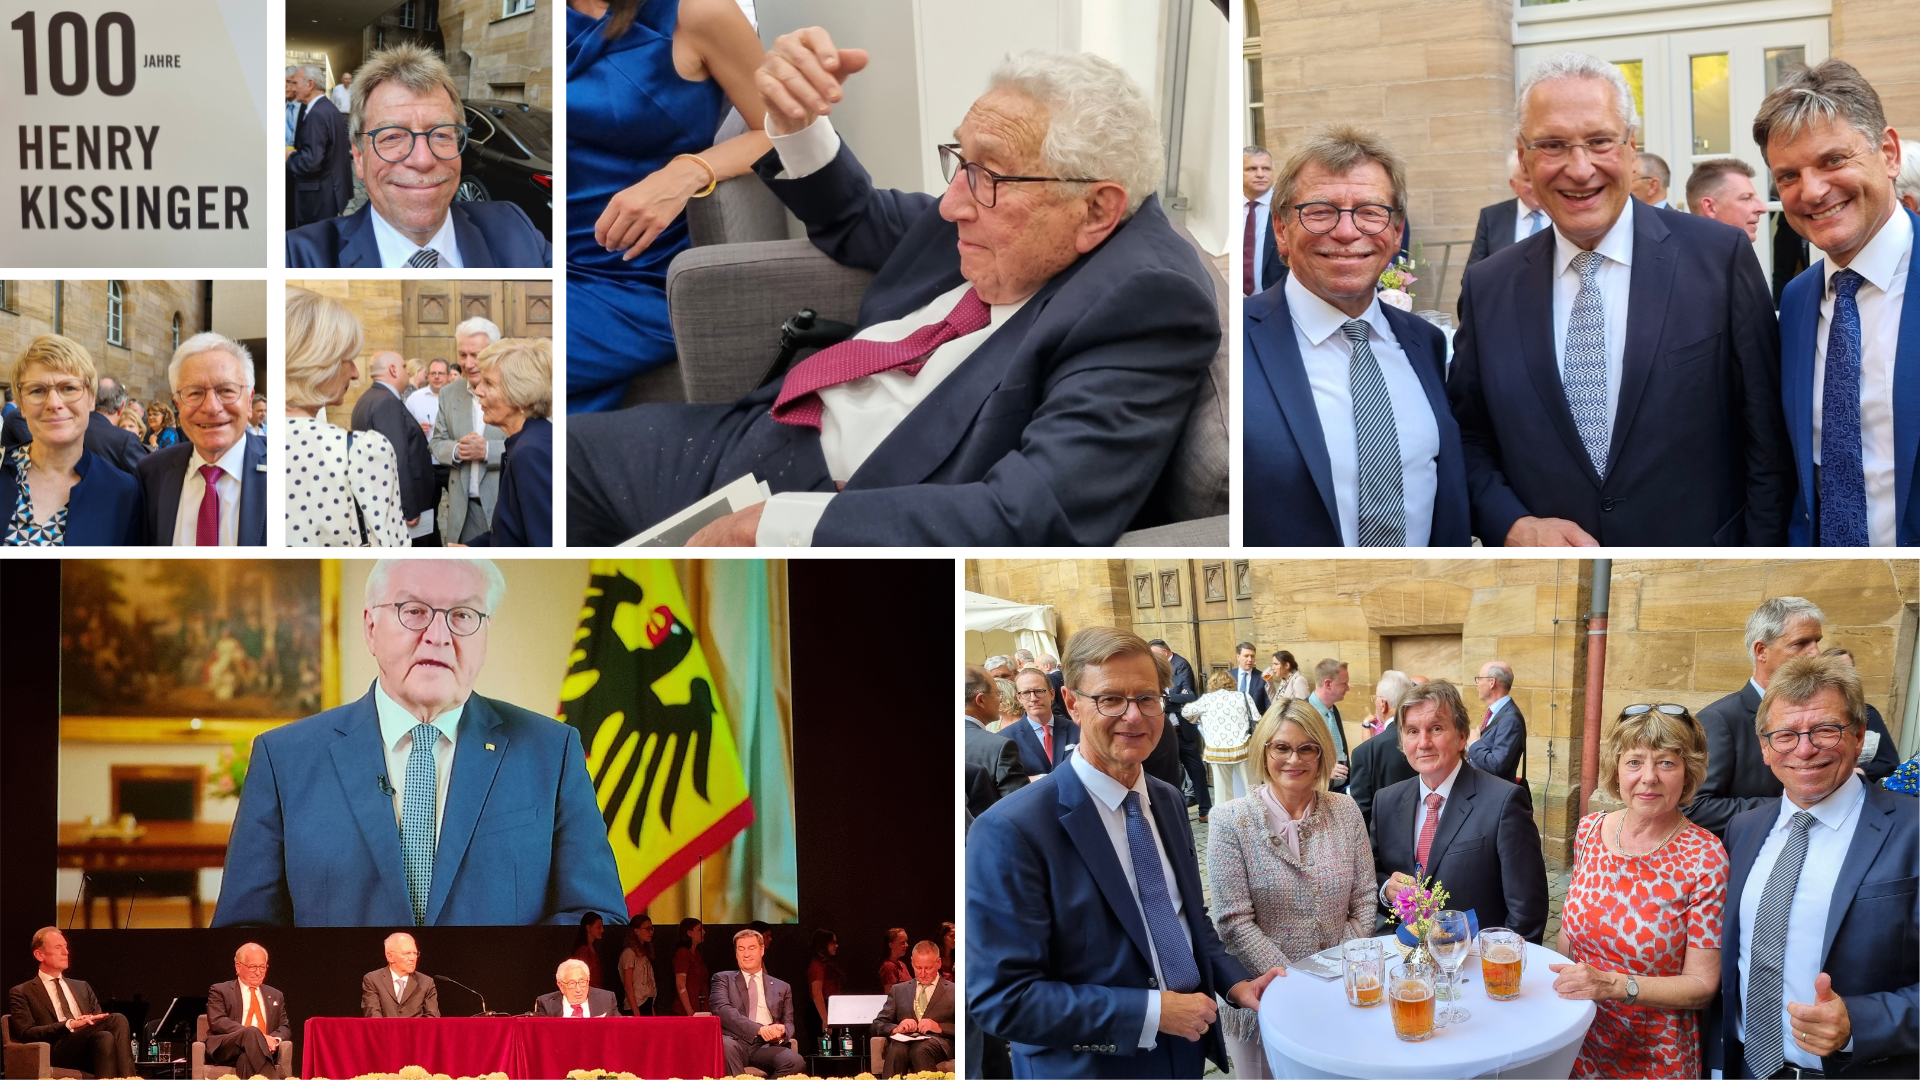 Almost historical: 100th Birthday Ceremony & Party for and with Henry Kissinger in Fürth › Industrial Management